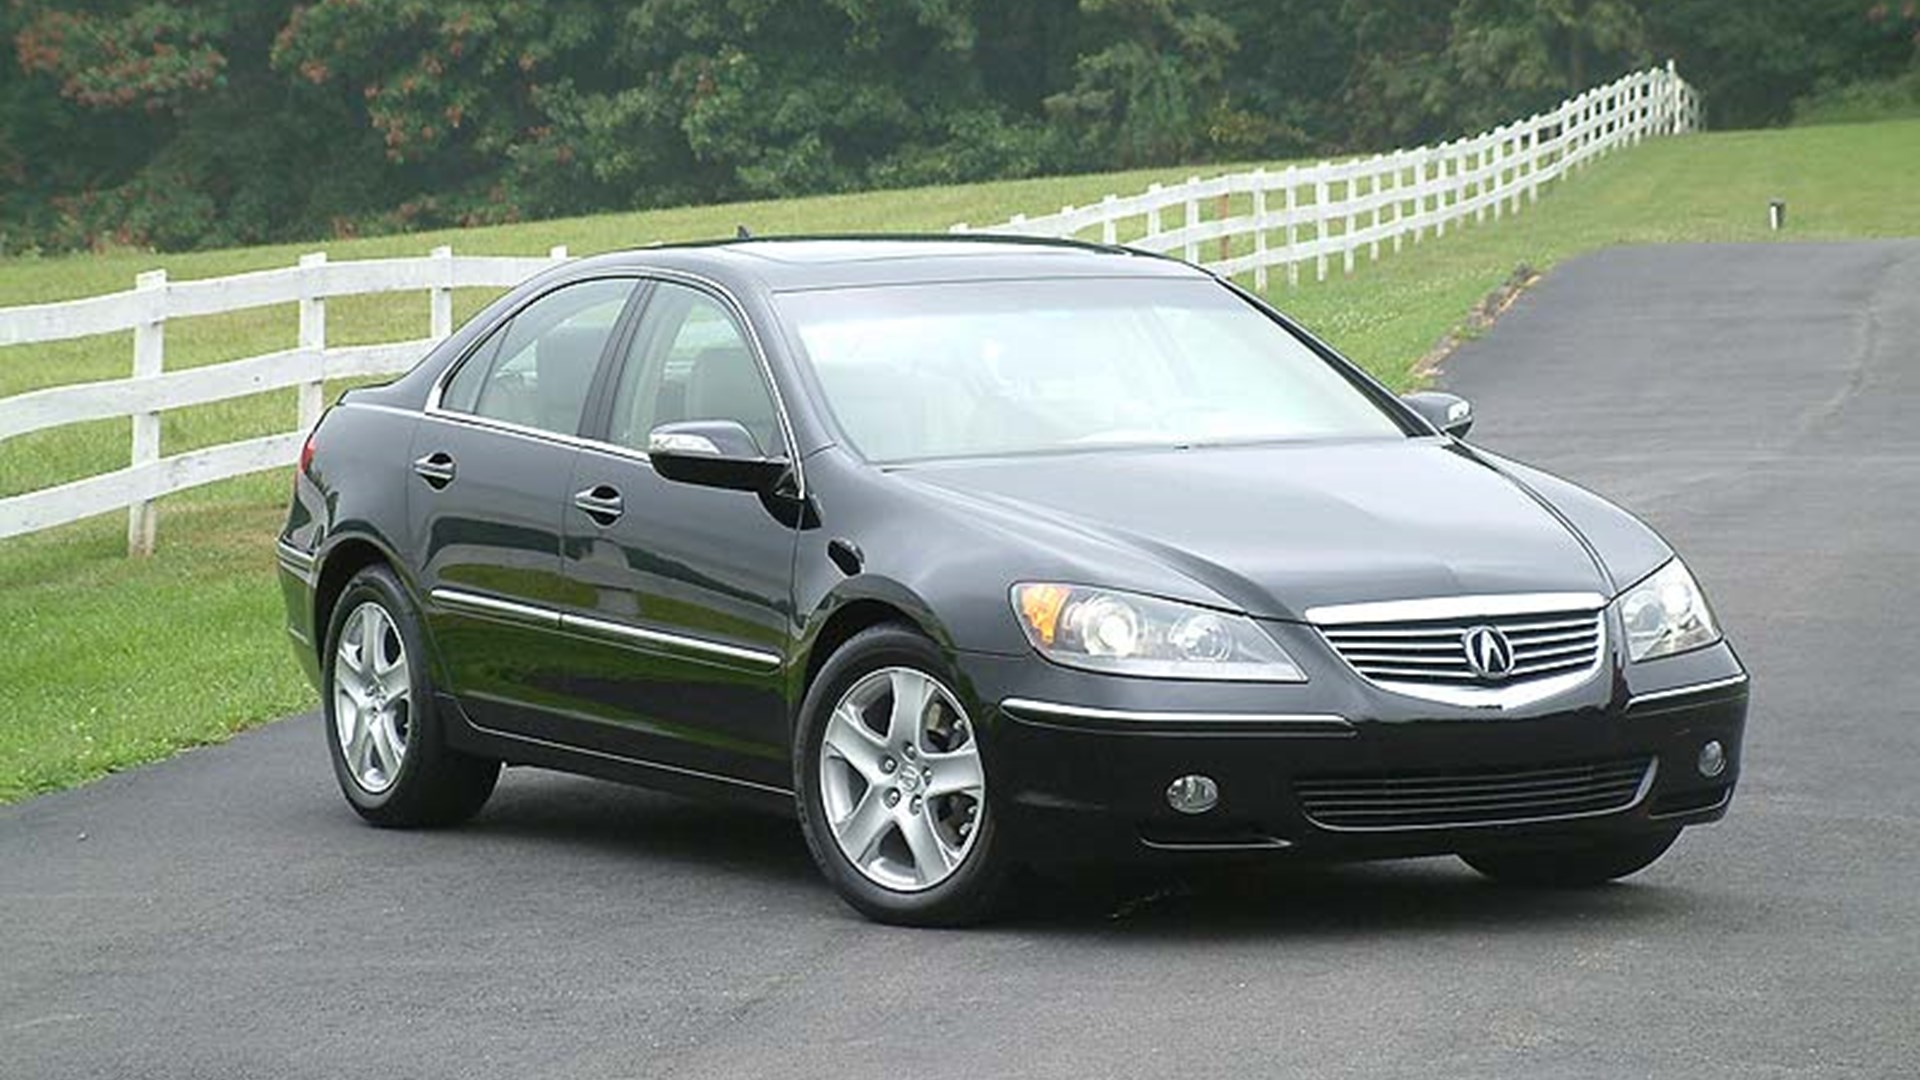 2005 - 2015 Acura RL Used Vehicle Review | AutoTrader.ca